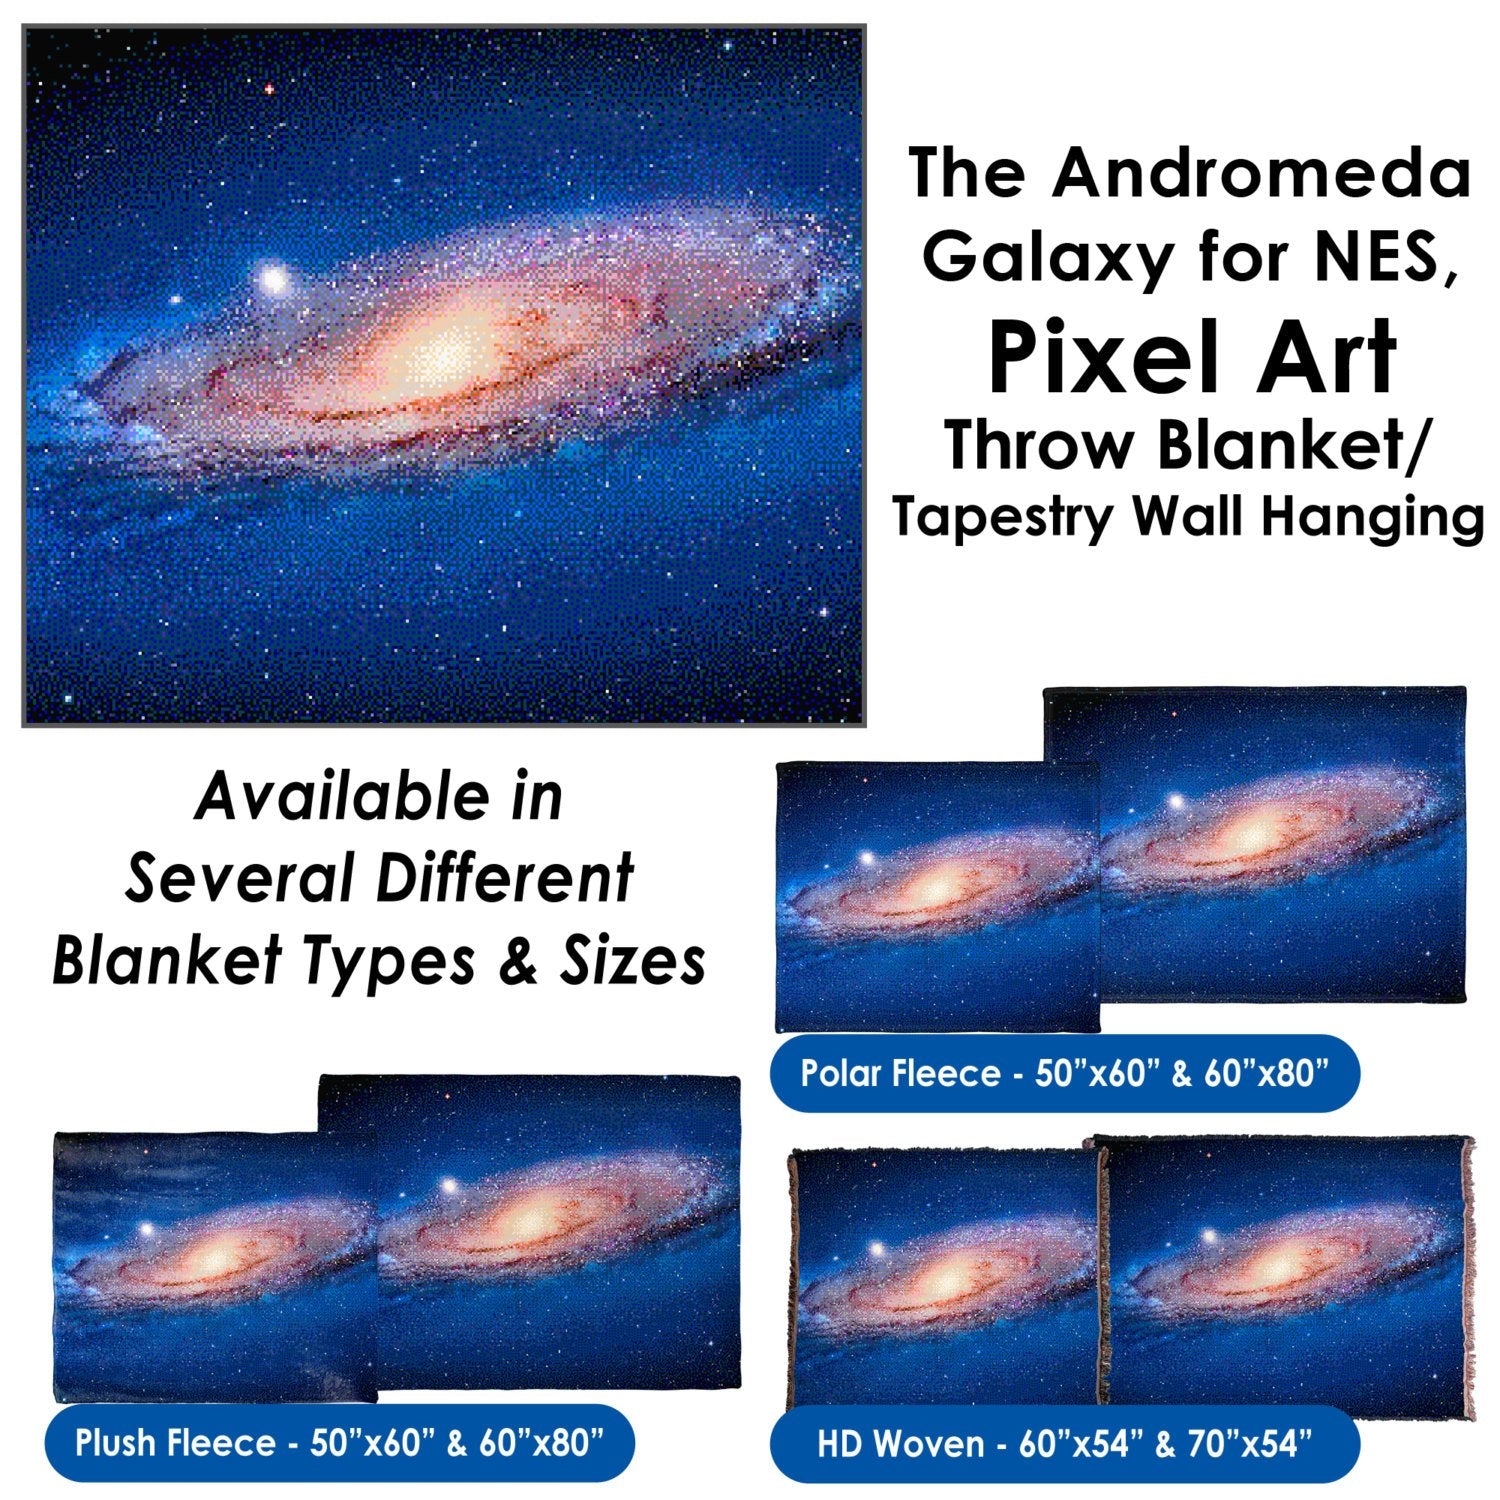 The Andromeda Galaxy for NES, Pixel Art - Throw Blanket / Tapestry Wall Hanging